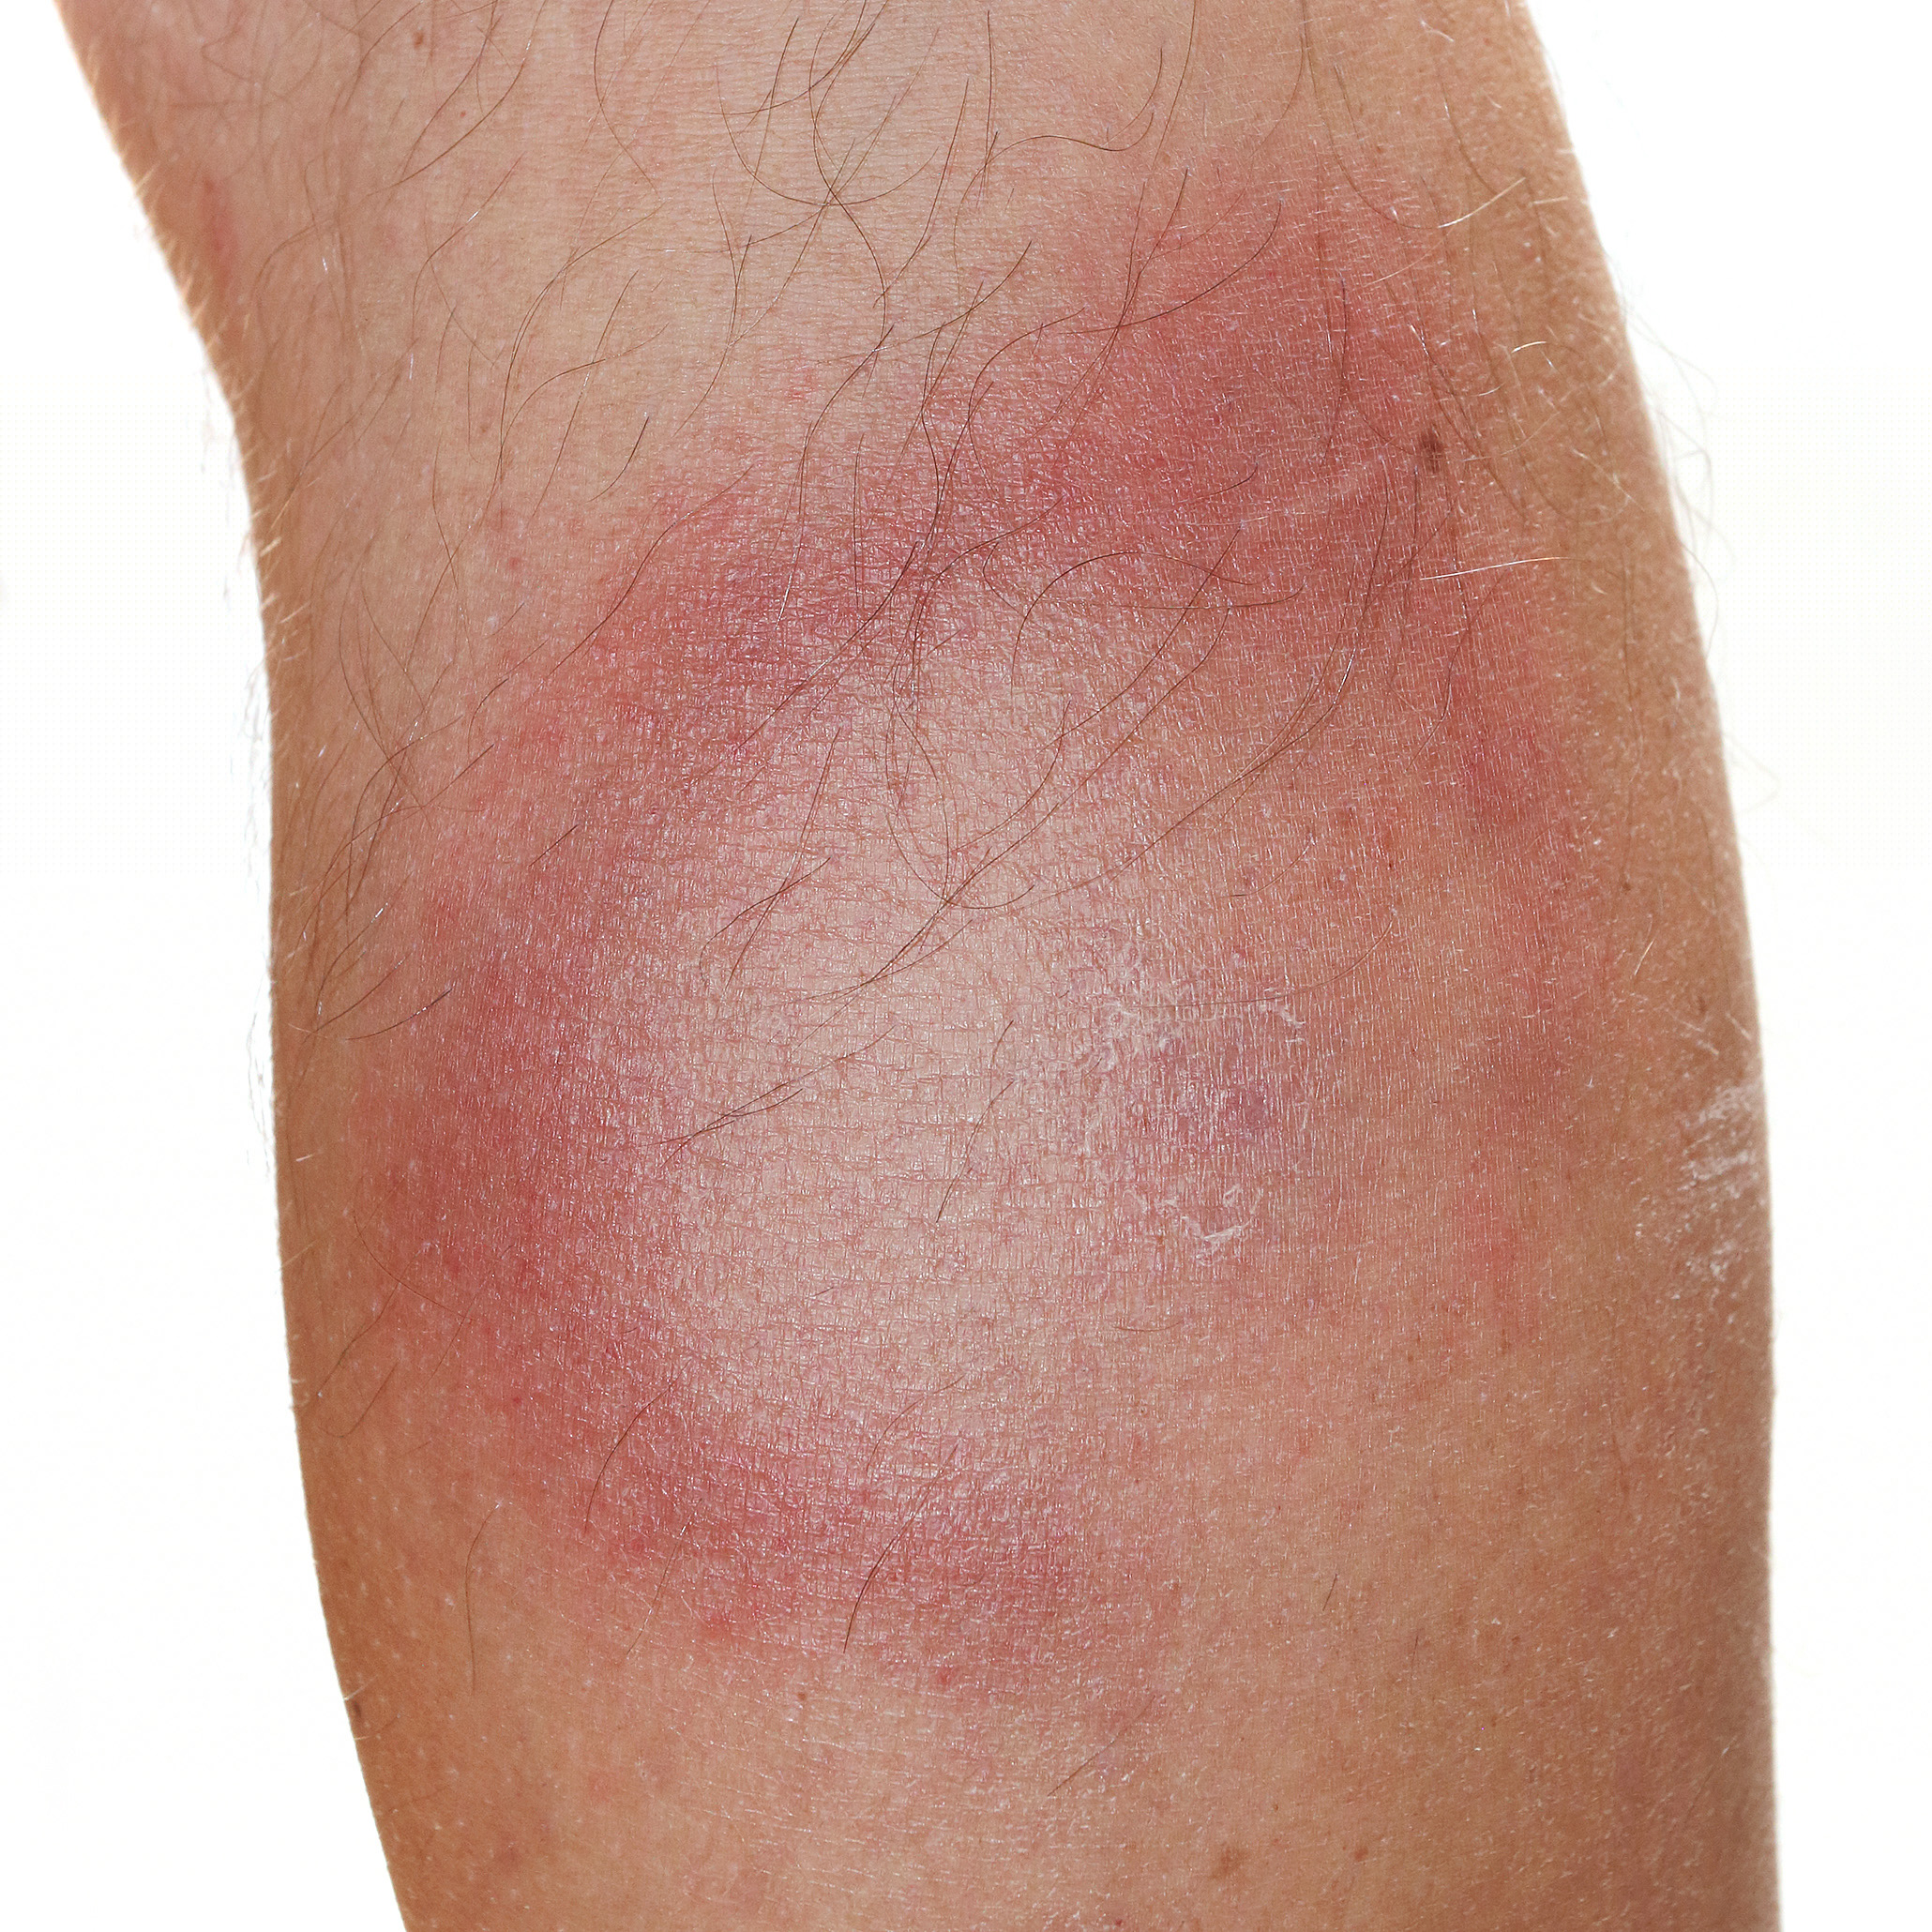 Not All Round Rashes Are Ringworm: A Differential…